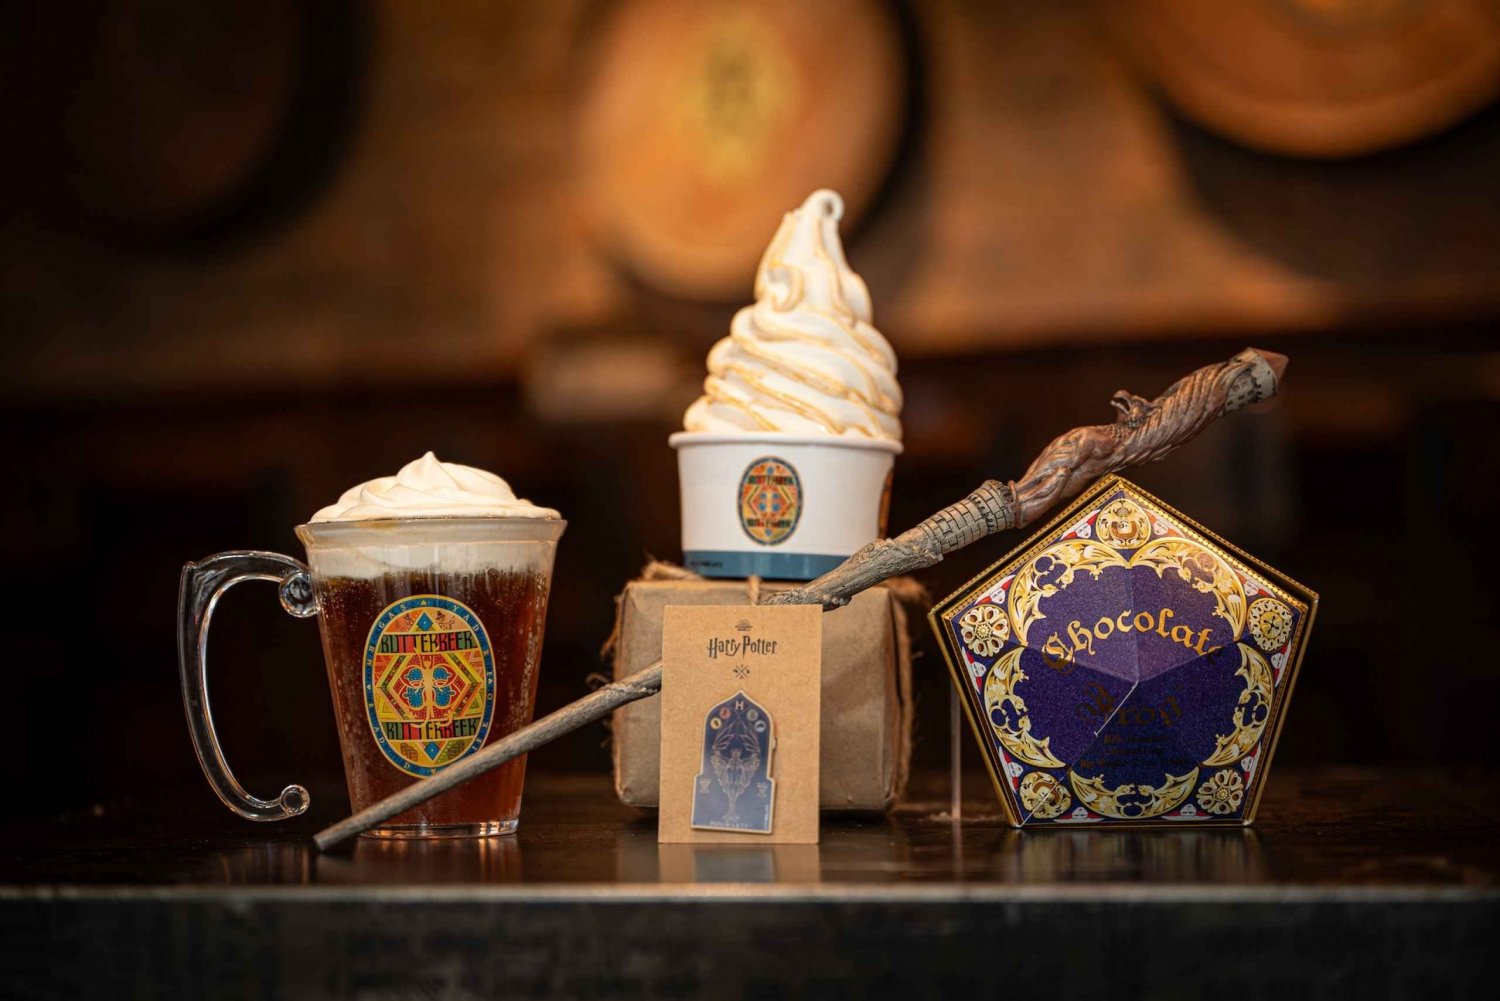 NYC: Harry Potter New York Shop with Wand & Butterbeer